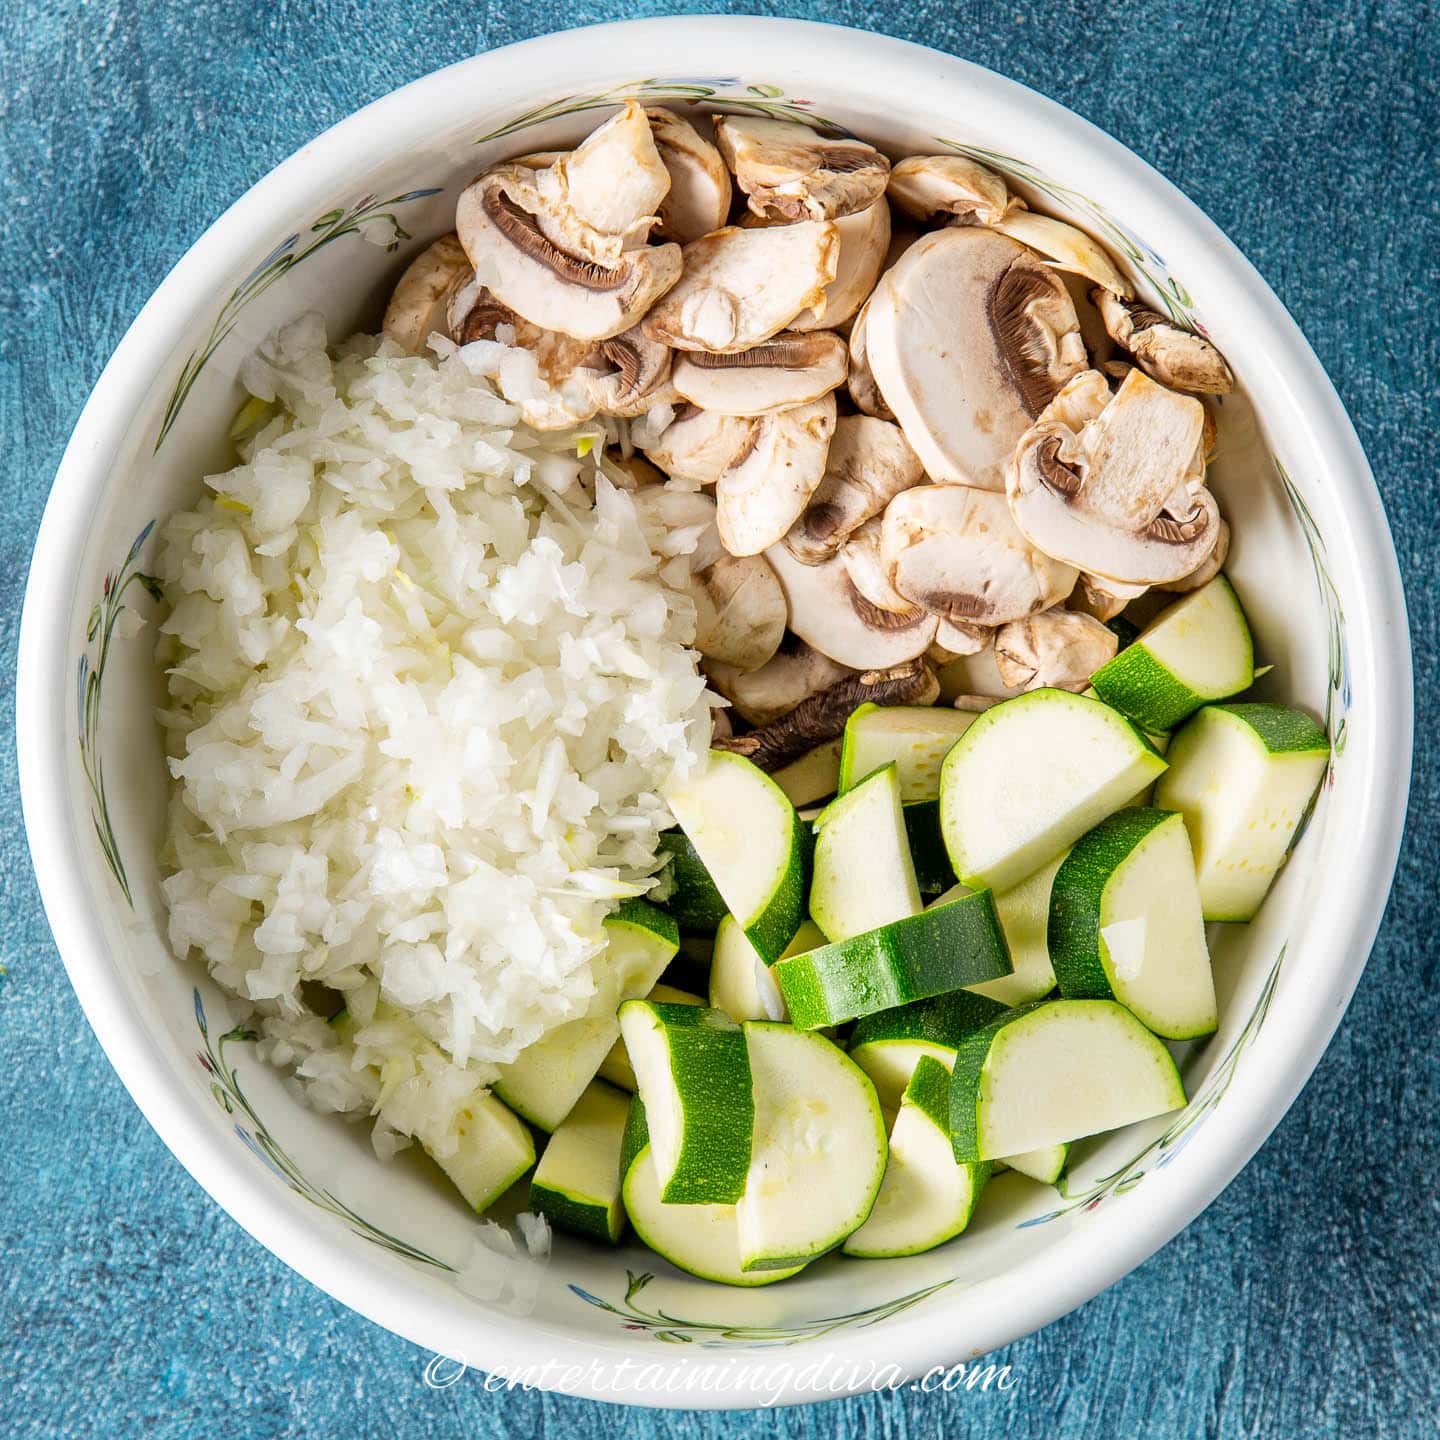 diced onion, chopped mushrooms and sliced zucchini in a bowl